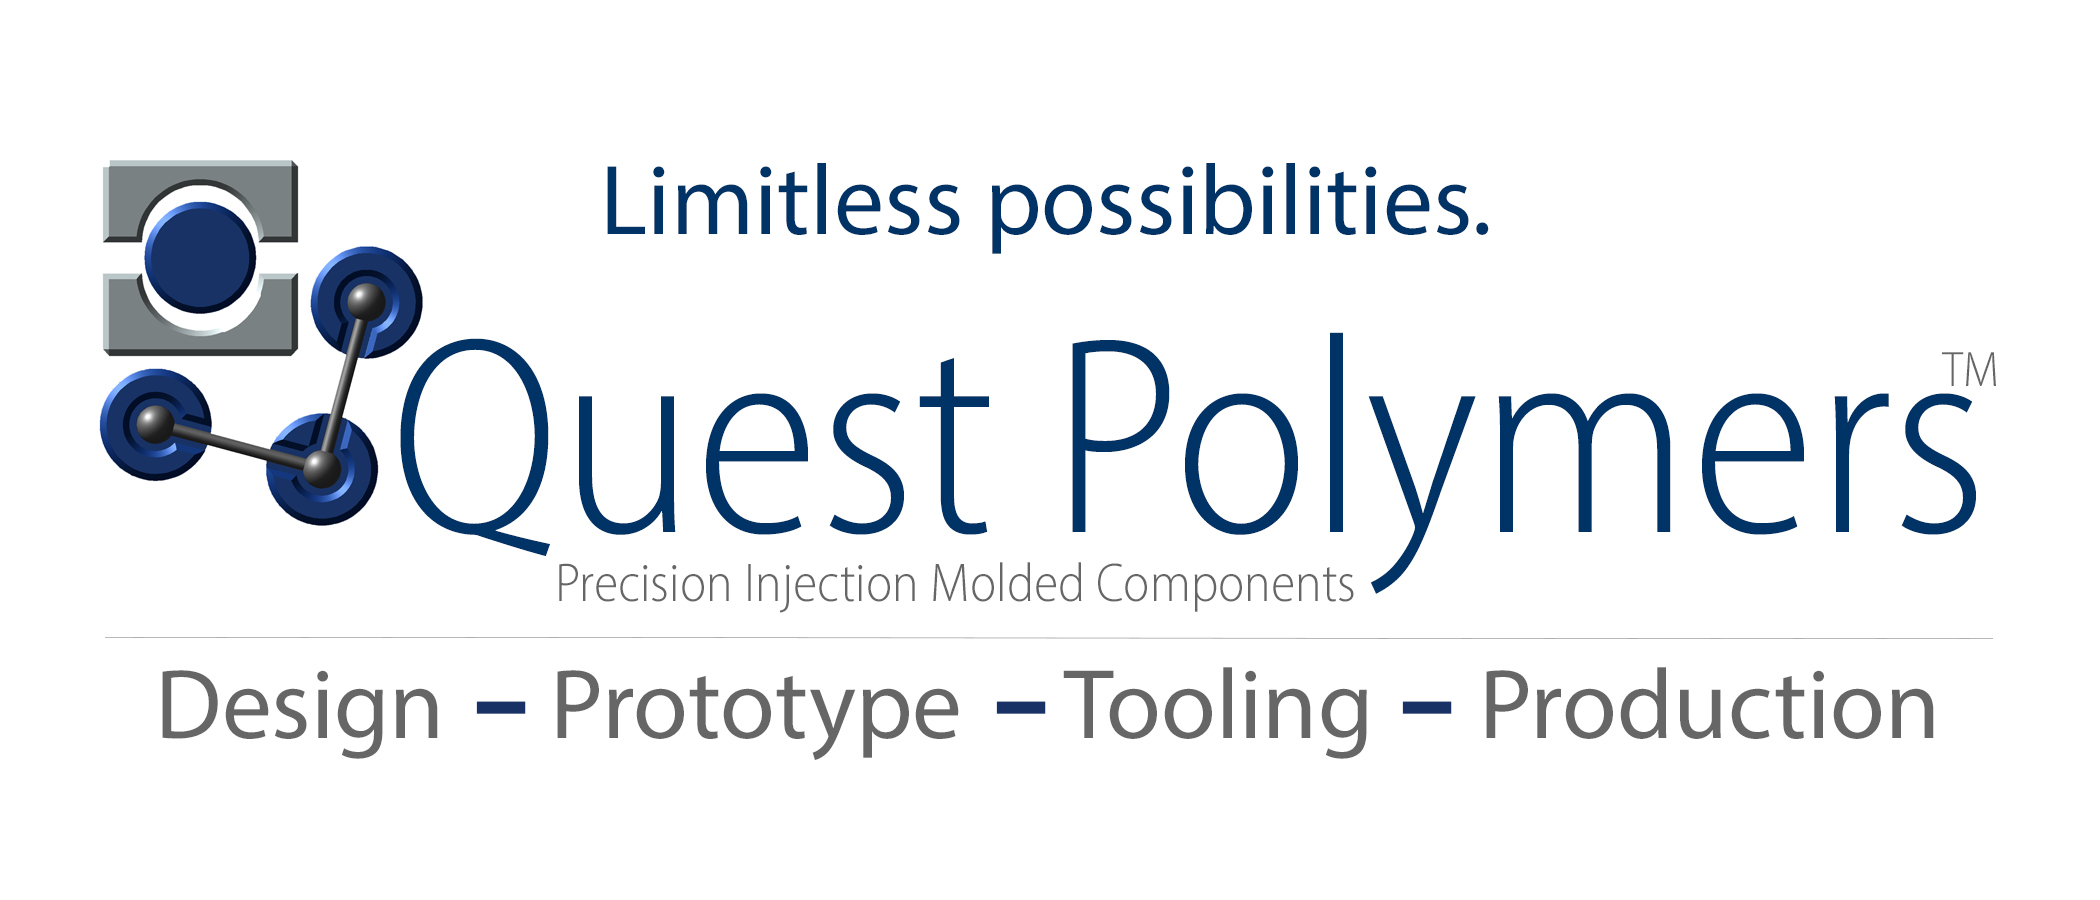 Quest polymers